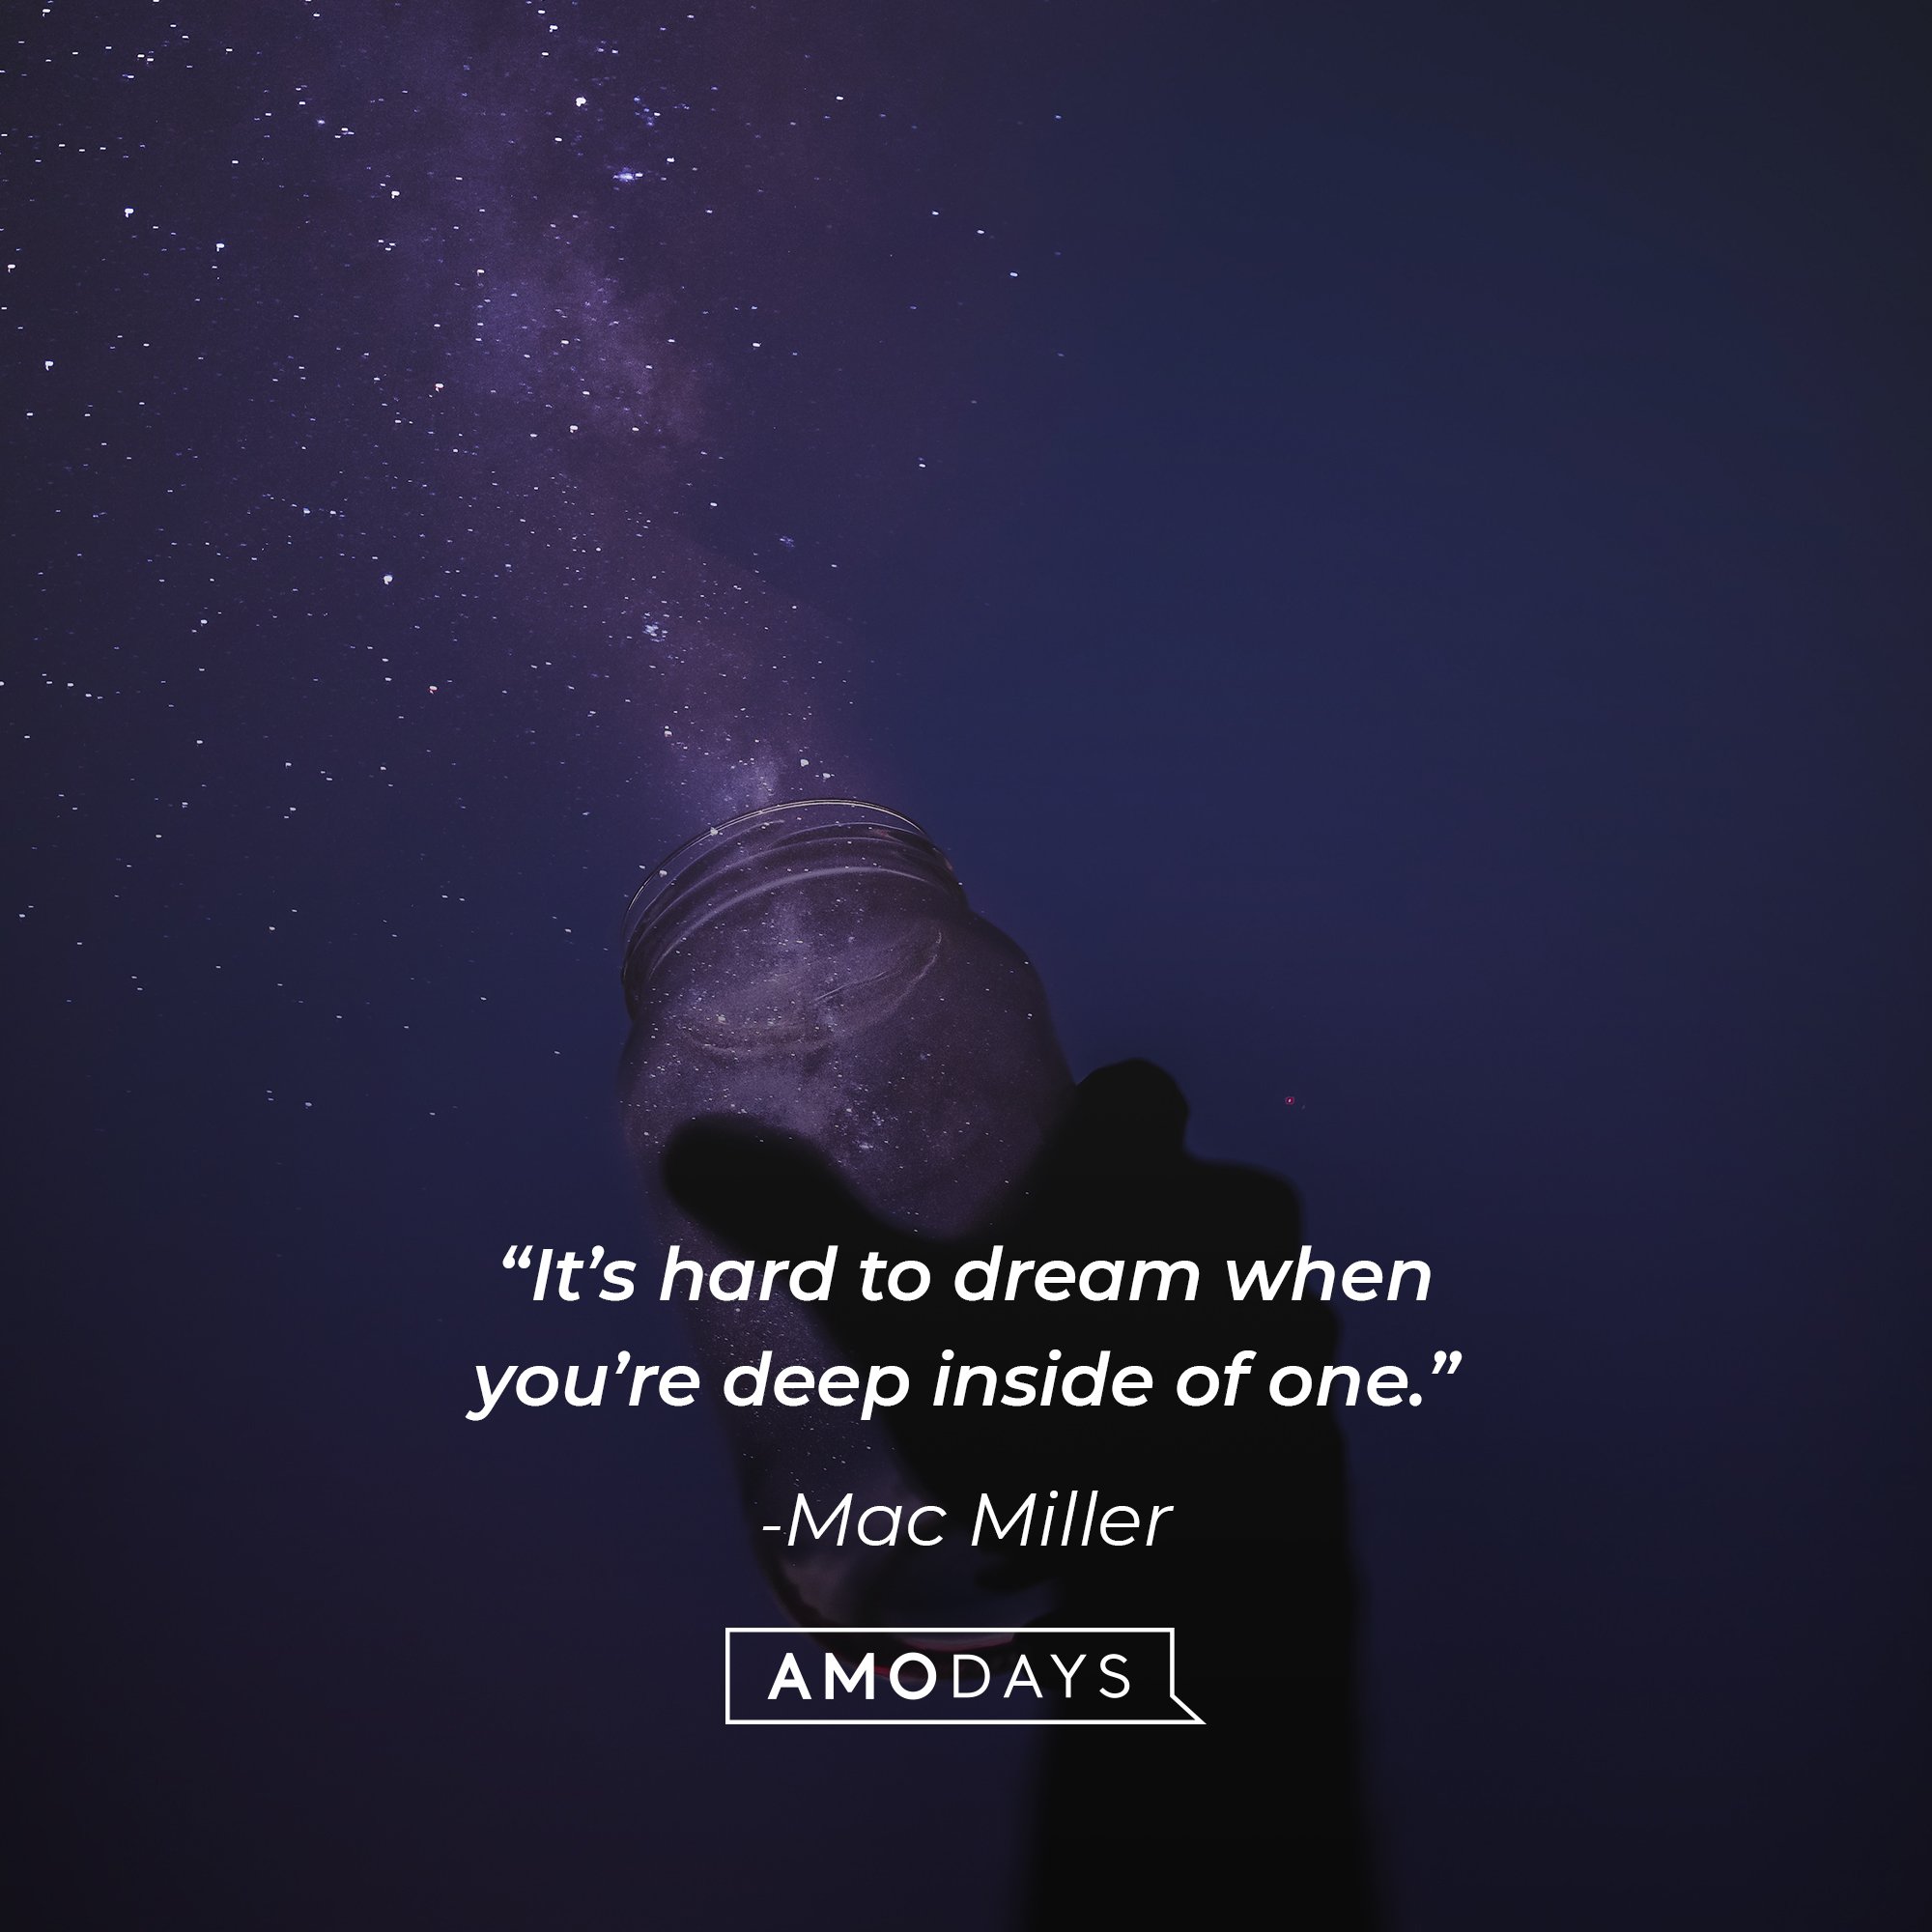   Mac Miller‘s quote: “It’s hard to dream when you’re deep inside of one.” │Image: AmoDays